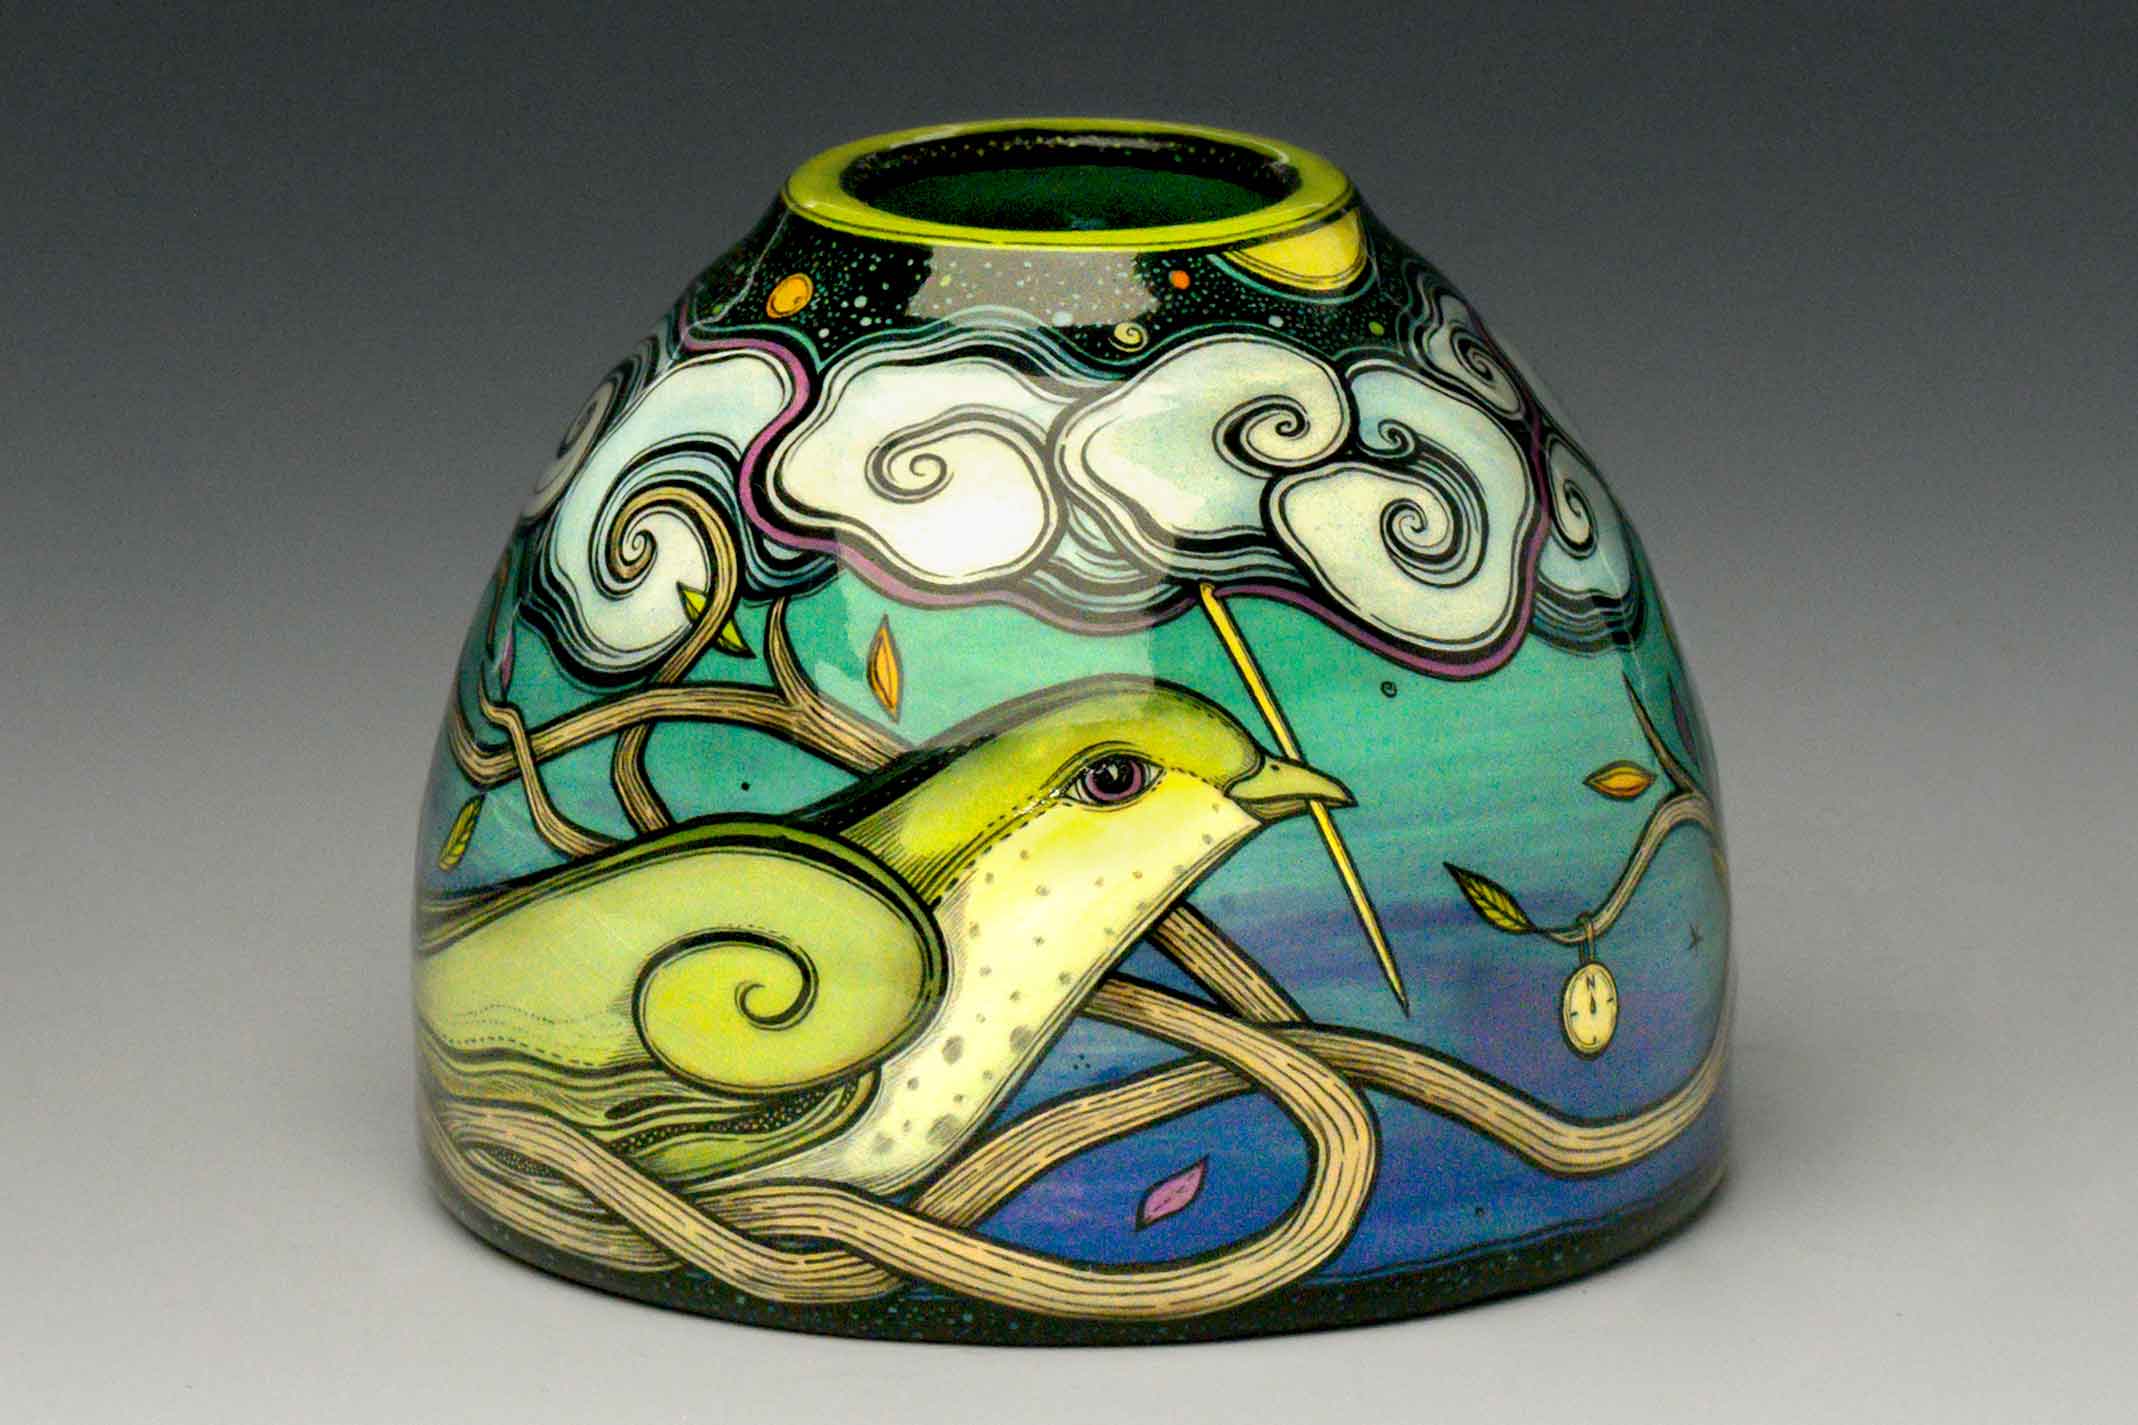 Terri Kern (American, born 1964), Seamstress, wheel thrown, hand painted with underglaze, finished with clear glaze, 2 1/2 x 3 in. diam. Photo by Michael Svach. This vase is representative of the works that will be on view in Resilience.